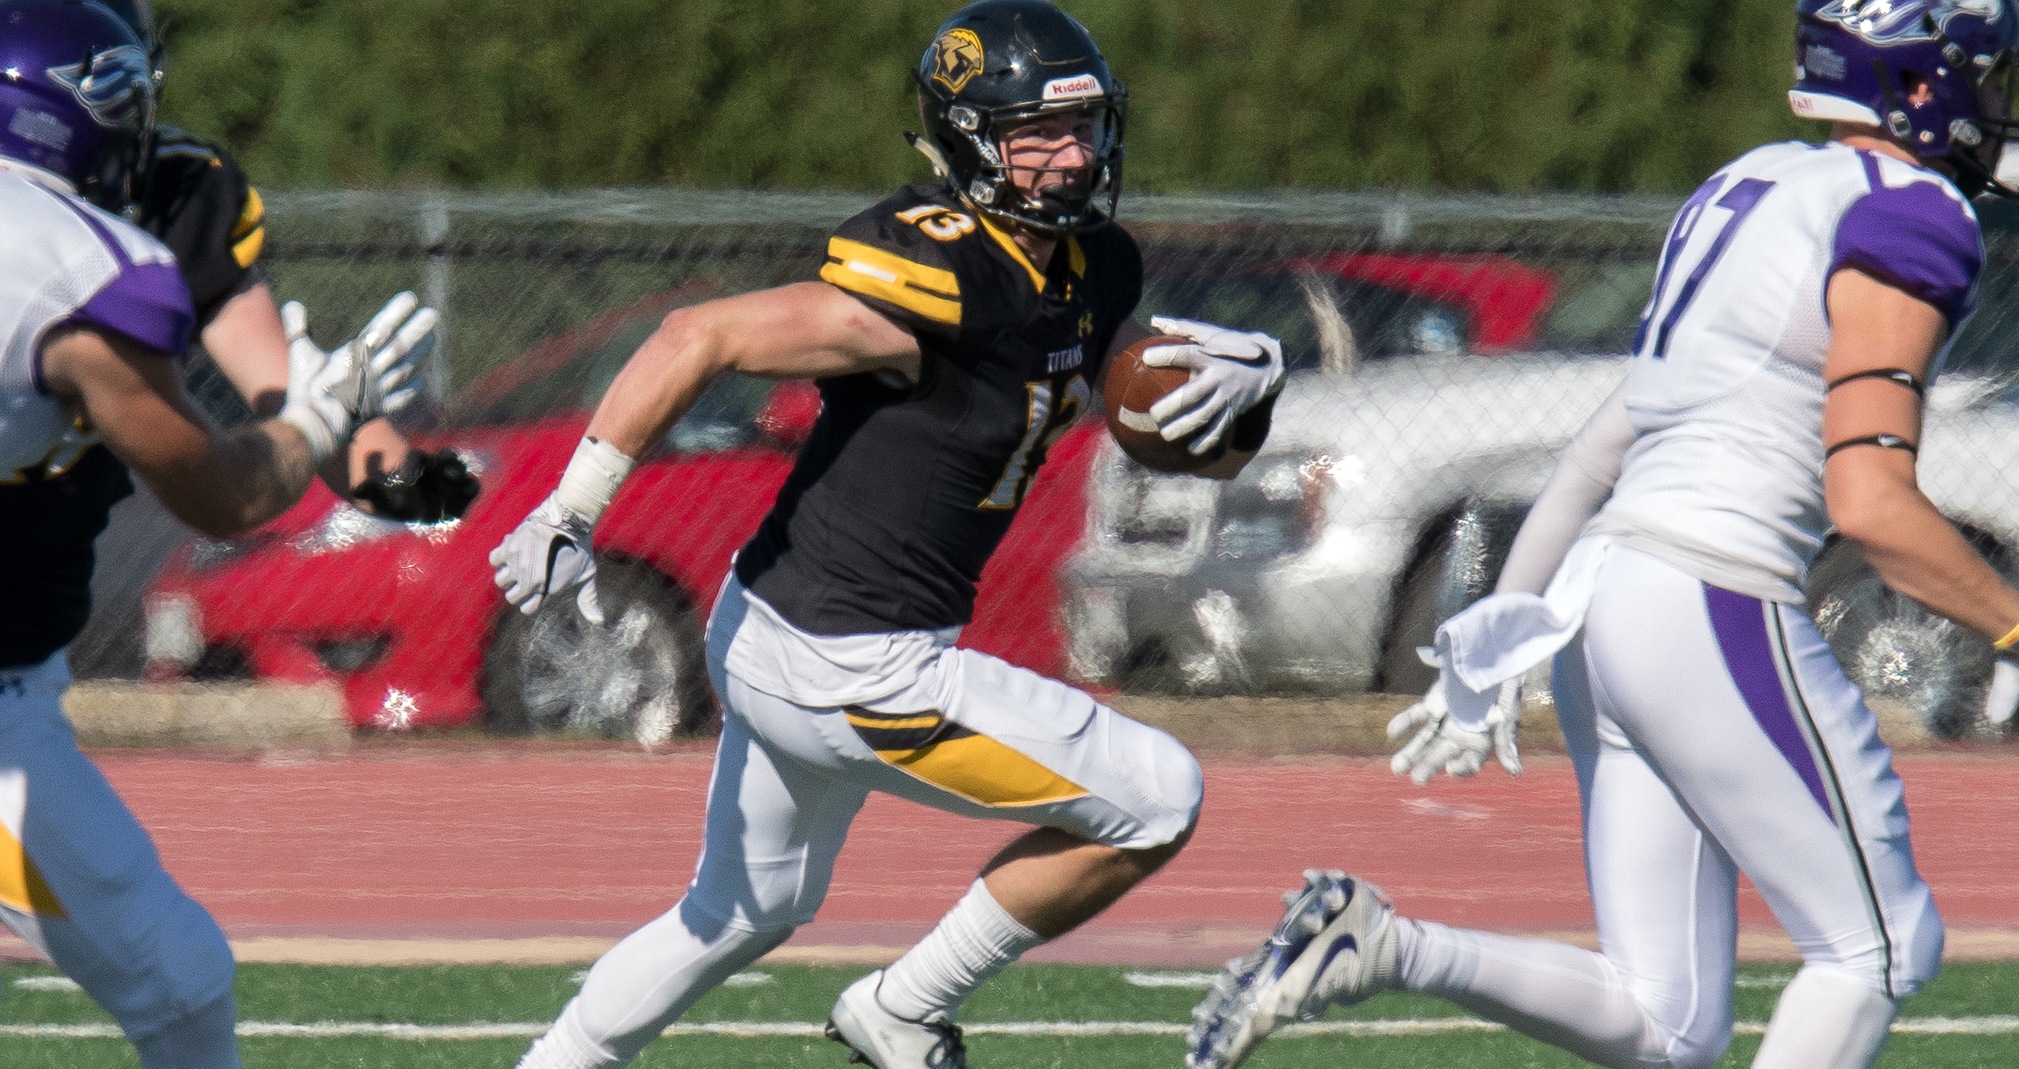 Sam Mentkowski caught 10 passes for 207 yards and two touchdowns, including a school-record 96-yard score.